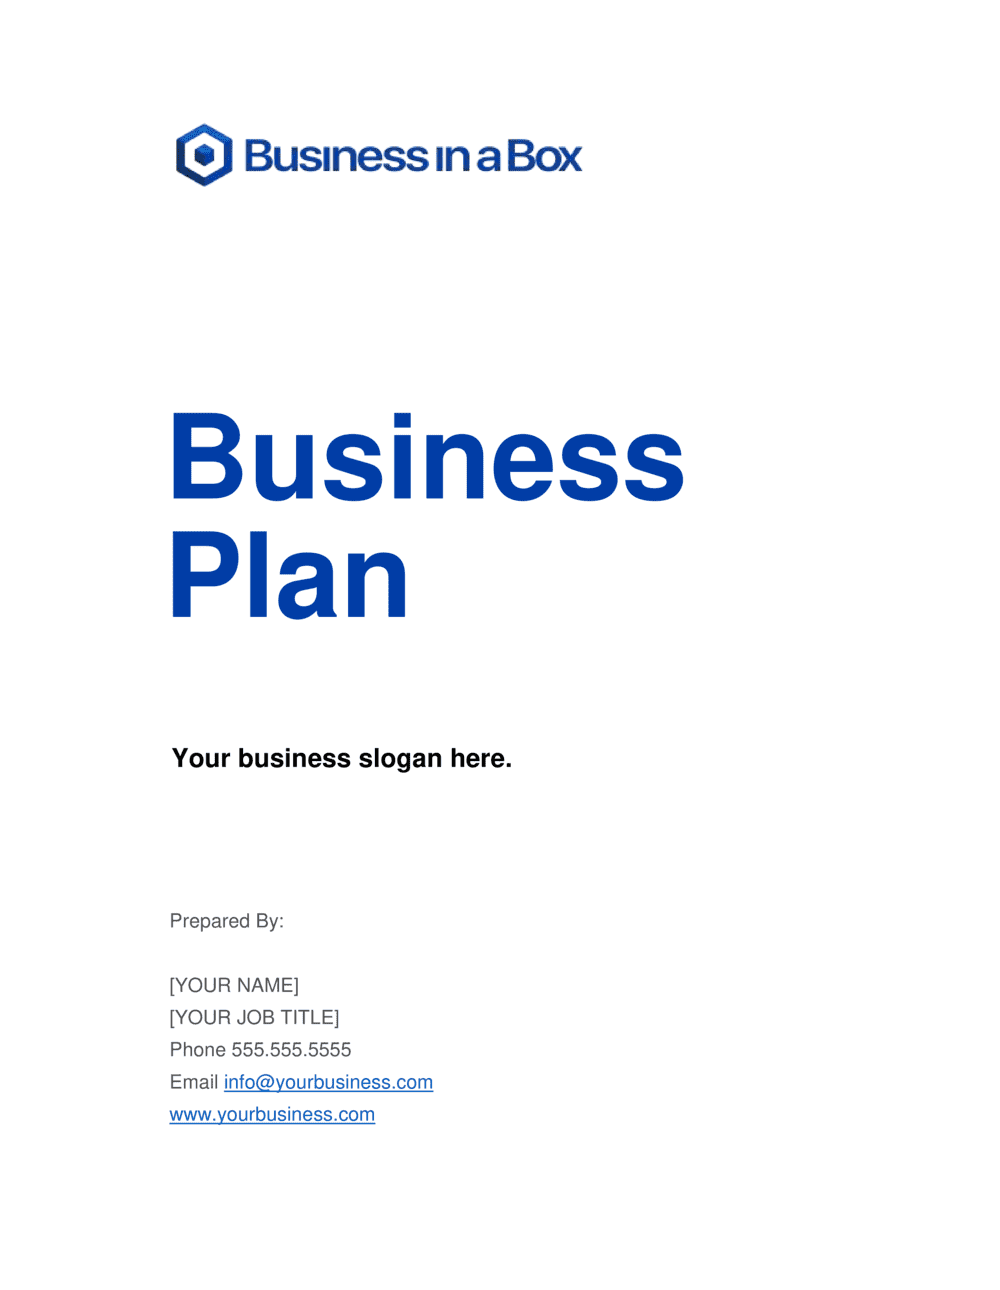 Business Plan Template By Business in a Box 